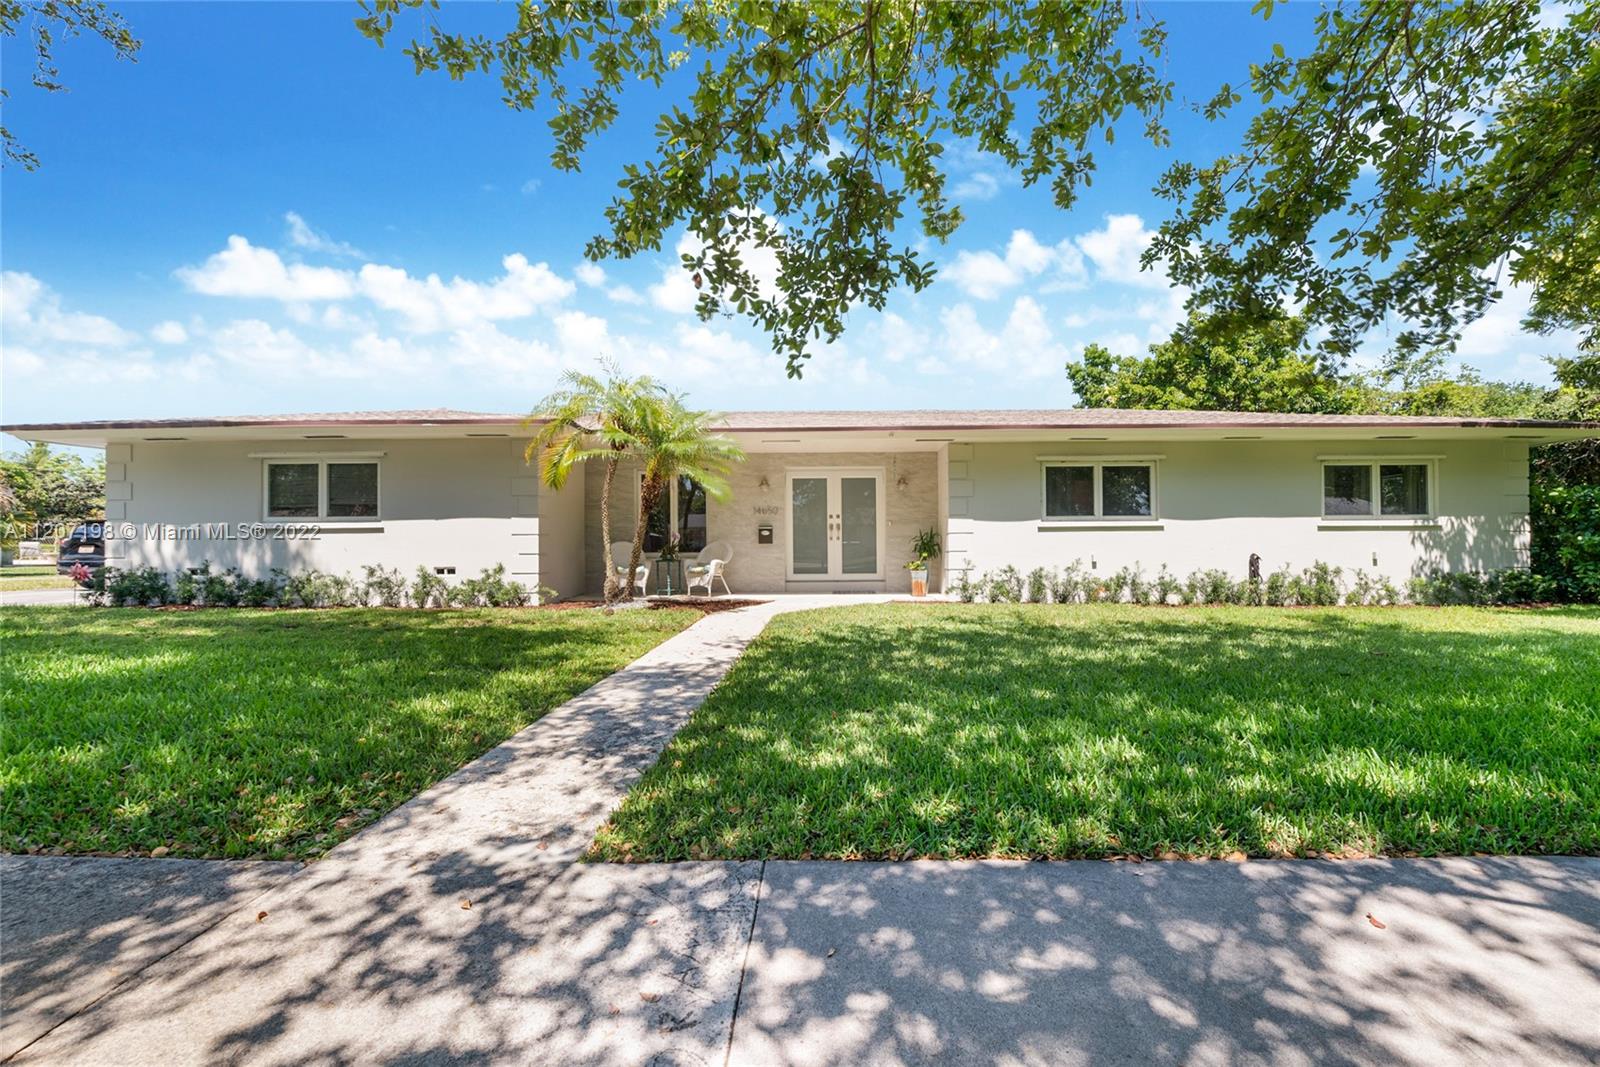 Highly sought after Mangowood home in the heart of Palmetto Bay! Updates abound which include: New Roof in 2022, New PVC Drains in 2021-22, 5 ton Elite Series AC in 2019 with New Ductwork throughout, Hurricane Impact Patio Sliders and Front Door, all New Bathrooms, Electrical Panel plus Surge protectors. This true Florida style home has an oversized covered screened pool patio that adds a lot more space for your lifestyle and entertaining. Large lot has room for your boat or RV. Located within a few blocks of Coral Reef Park, Shopping, Restaurants, and top area schools.